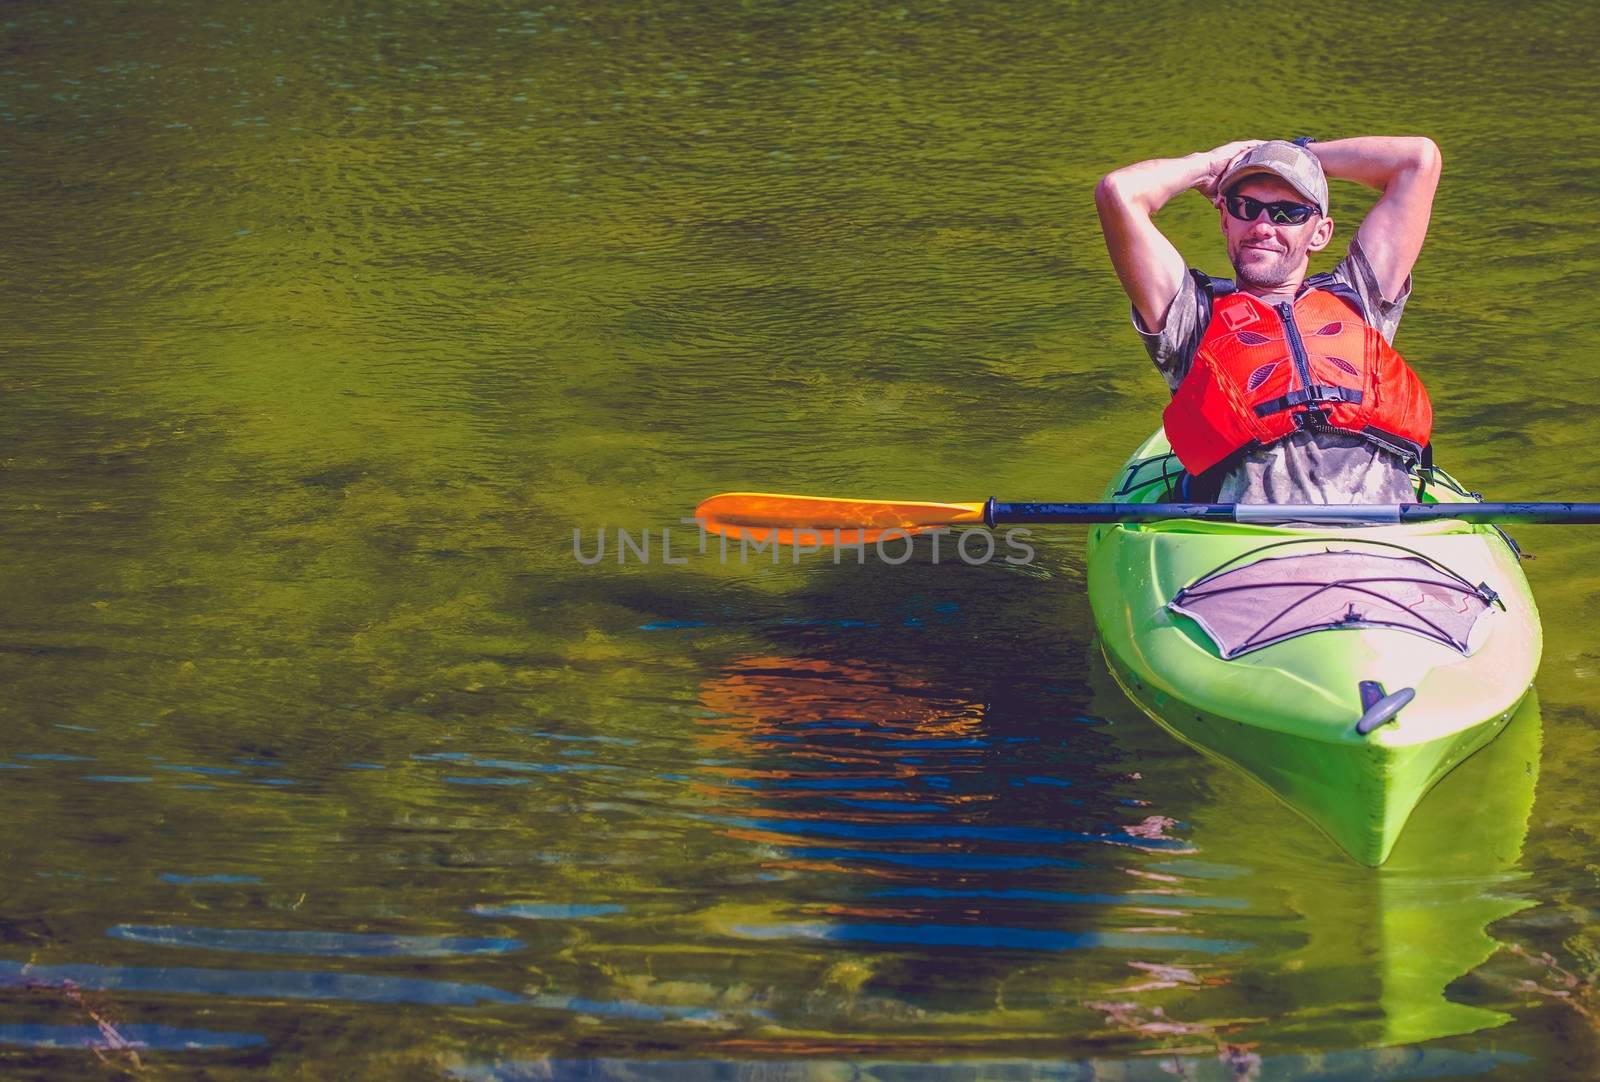 Relaxed Kayaker on the Lake. Caucasian Sportsman. Water Sports and Recreation Concept.